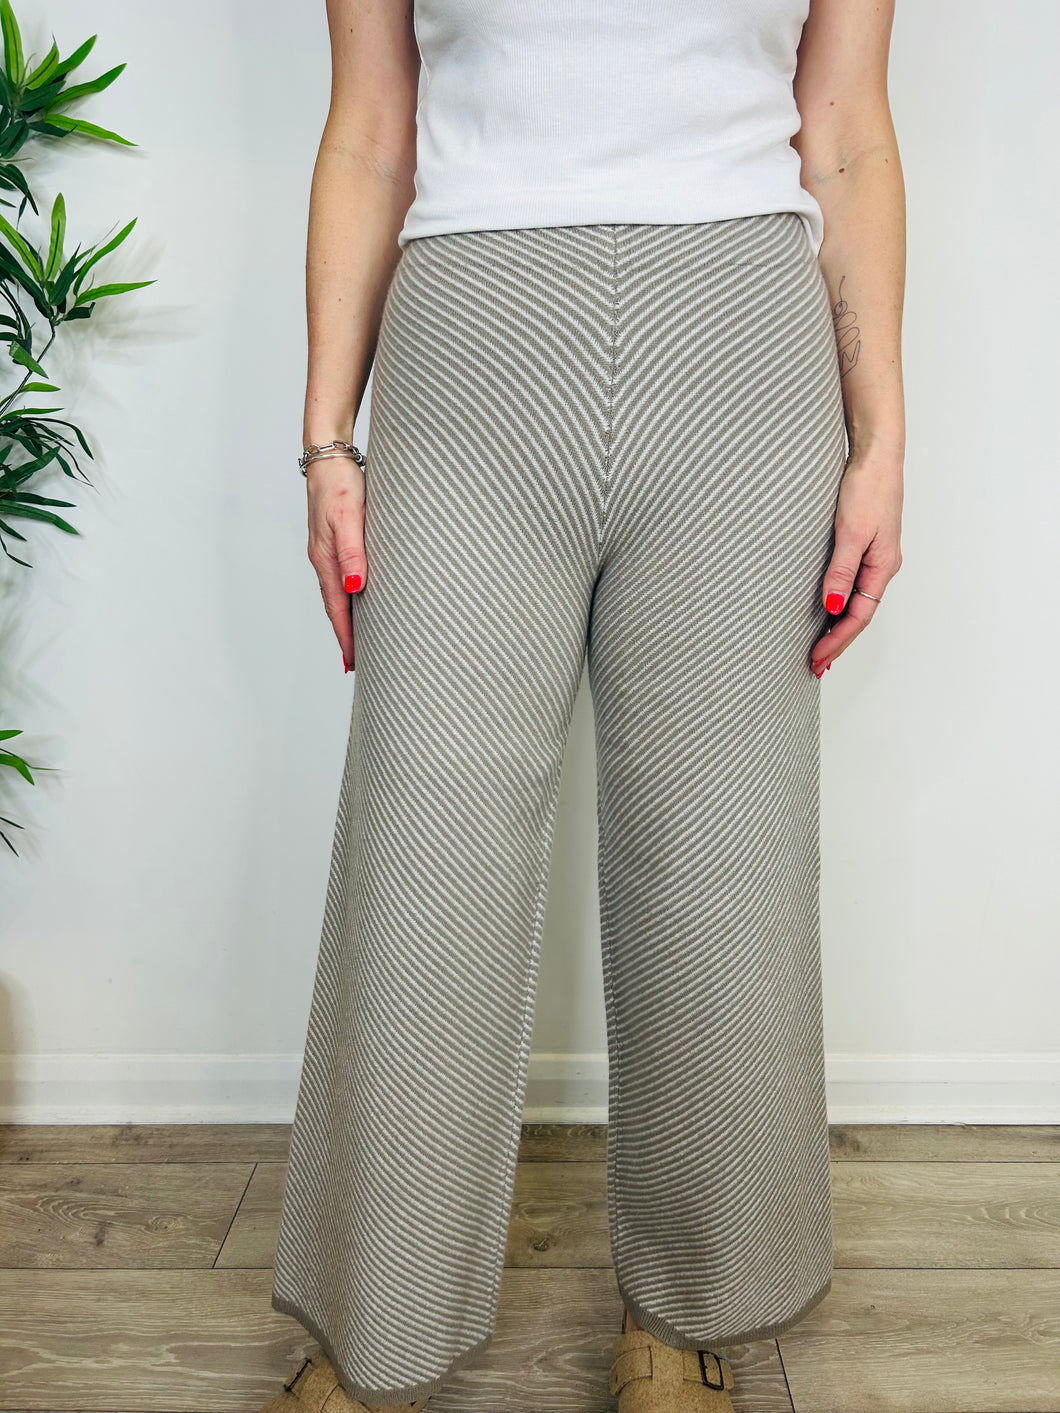 Twill Knit Trousers - Size S